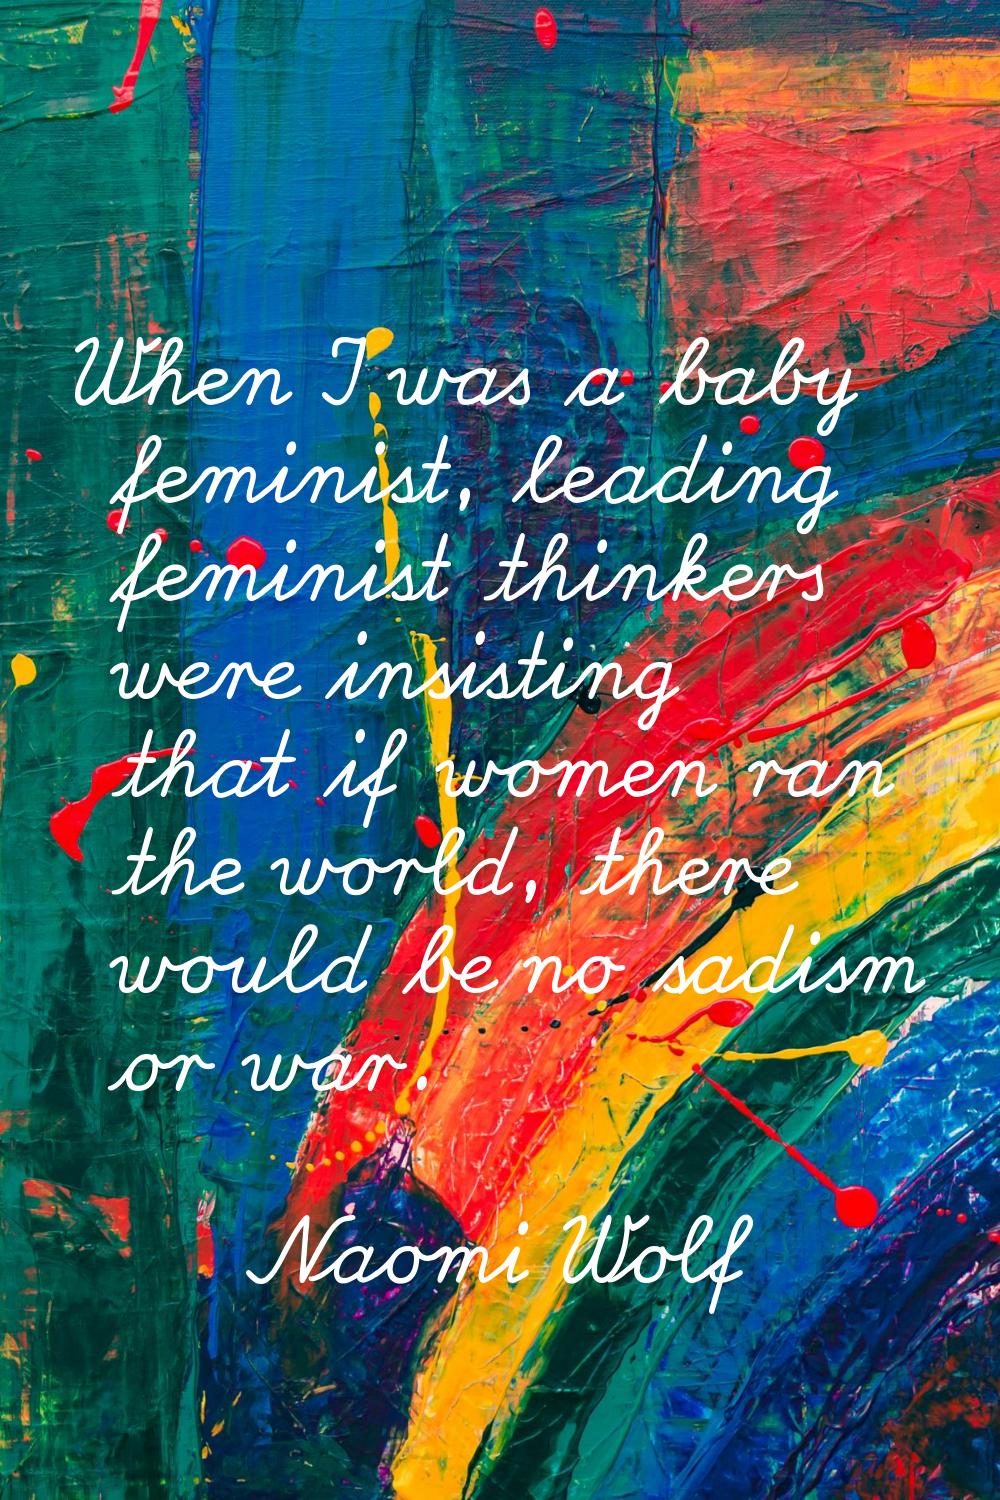 When I was a baby feminist, leading feminist thinkers were insisting that if women ran the world, t